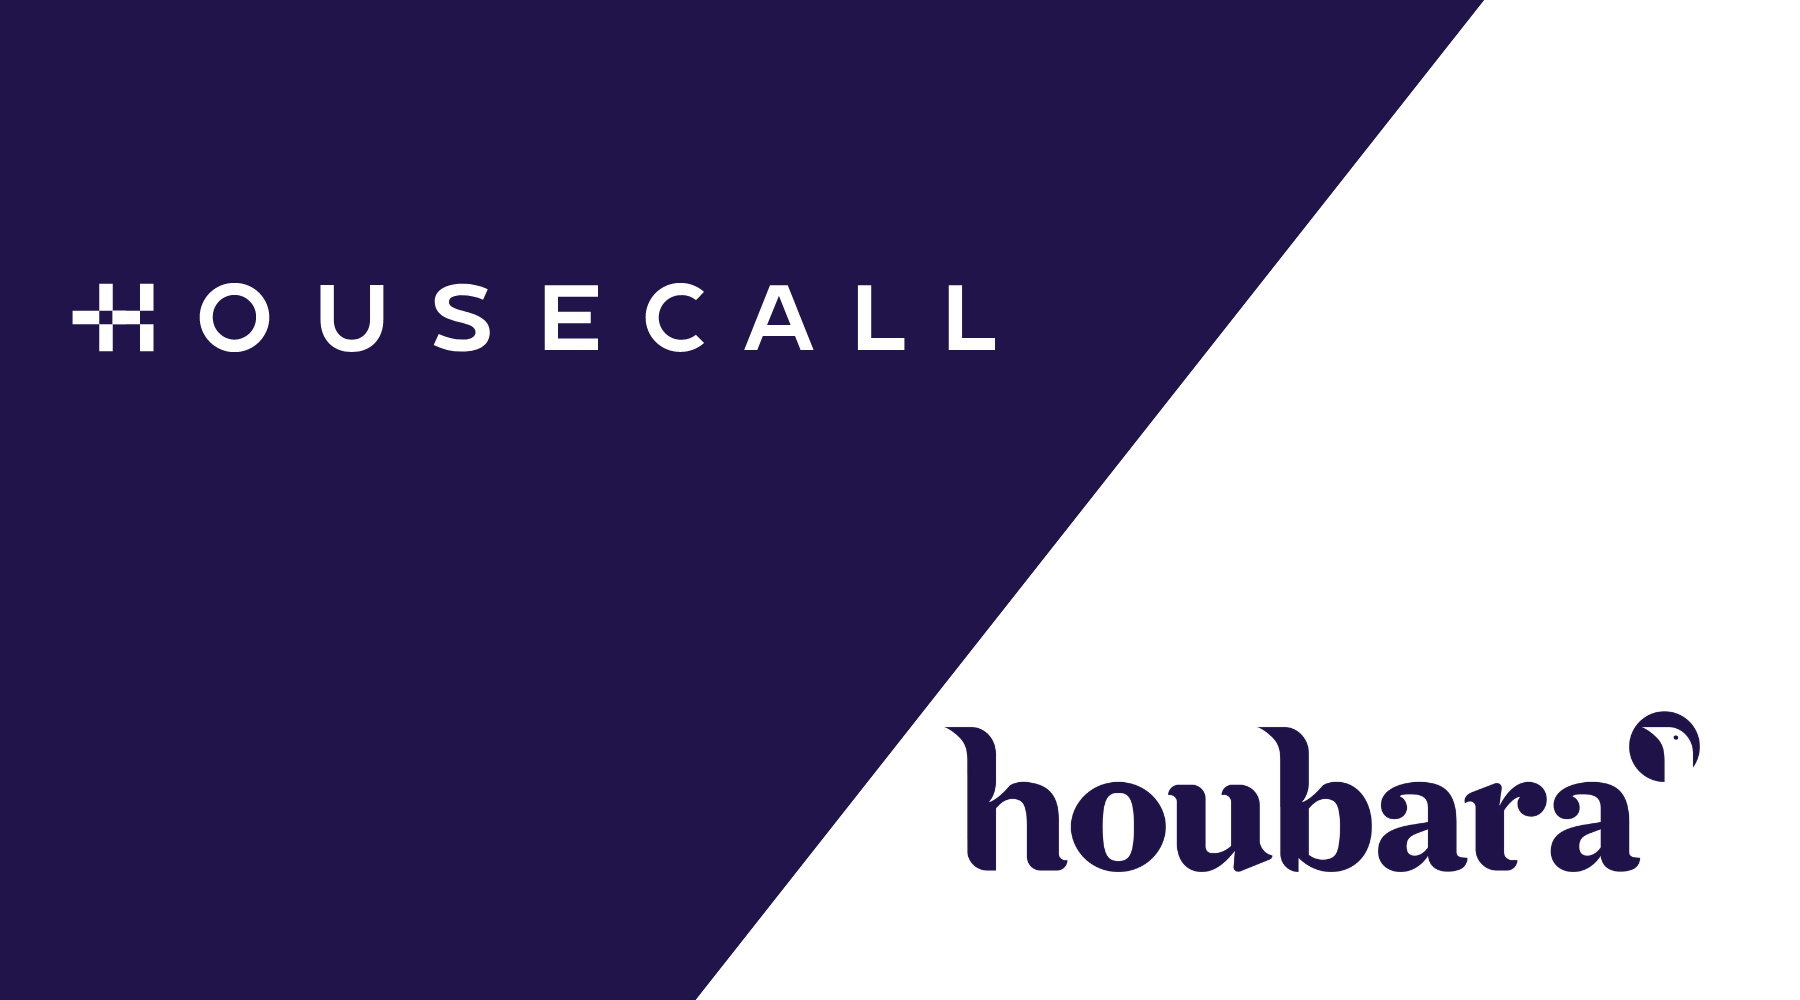 UAE Healthcare Platform Housecall Appoints Houbara as PR and Communications Partner